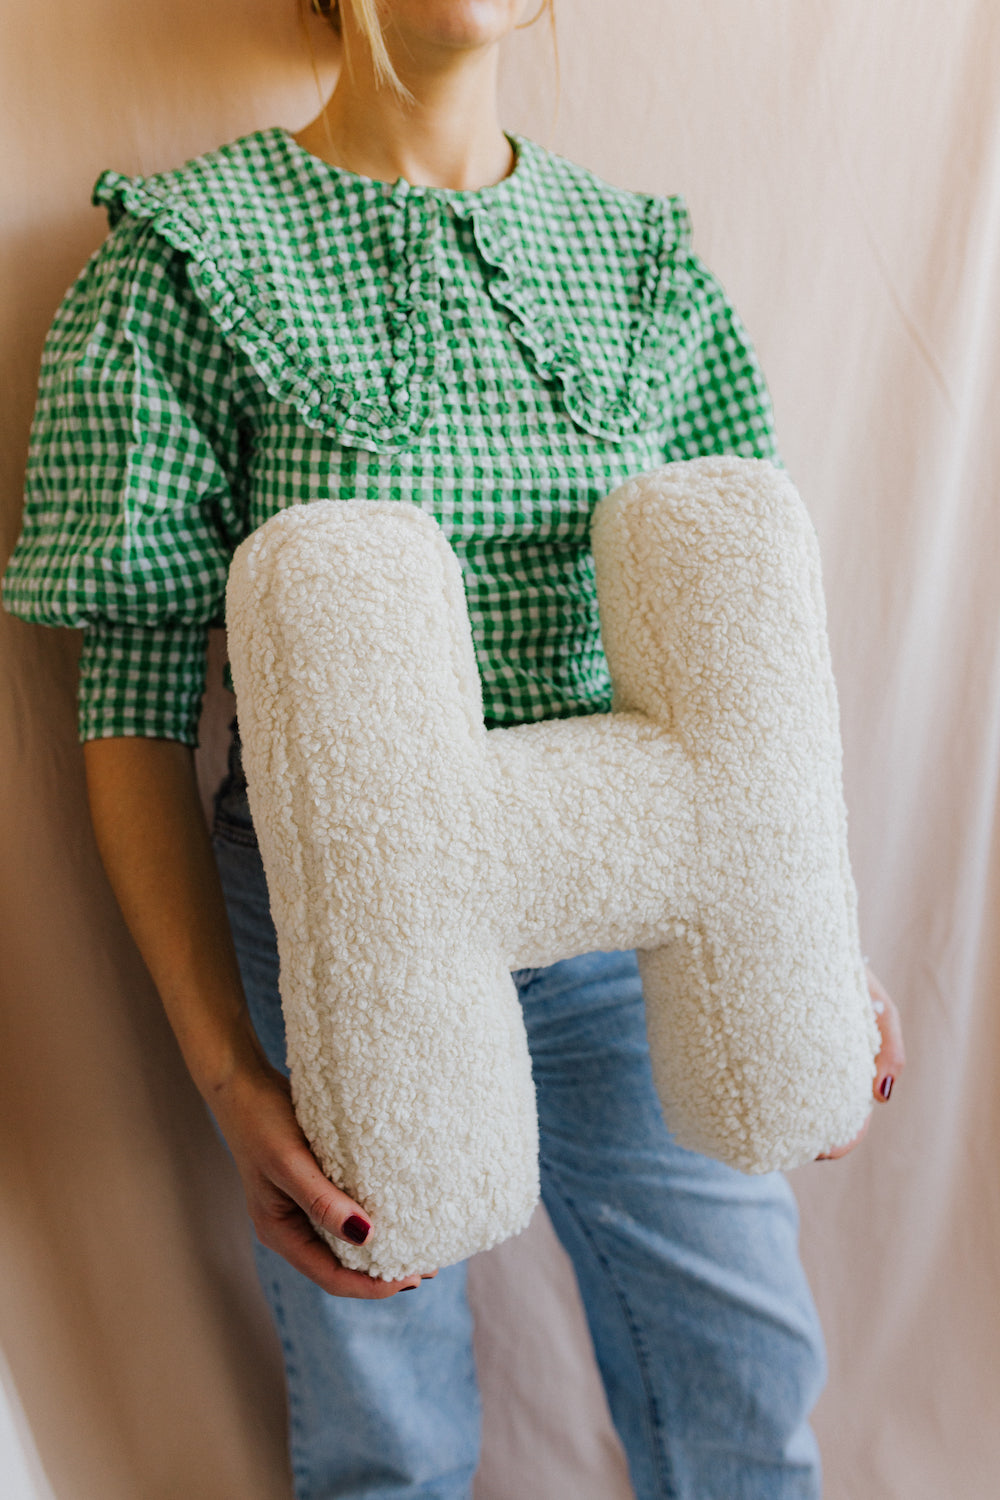 boucle letter cushion H teddy pillow by bettys home held by woman in green shirt on cream background